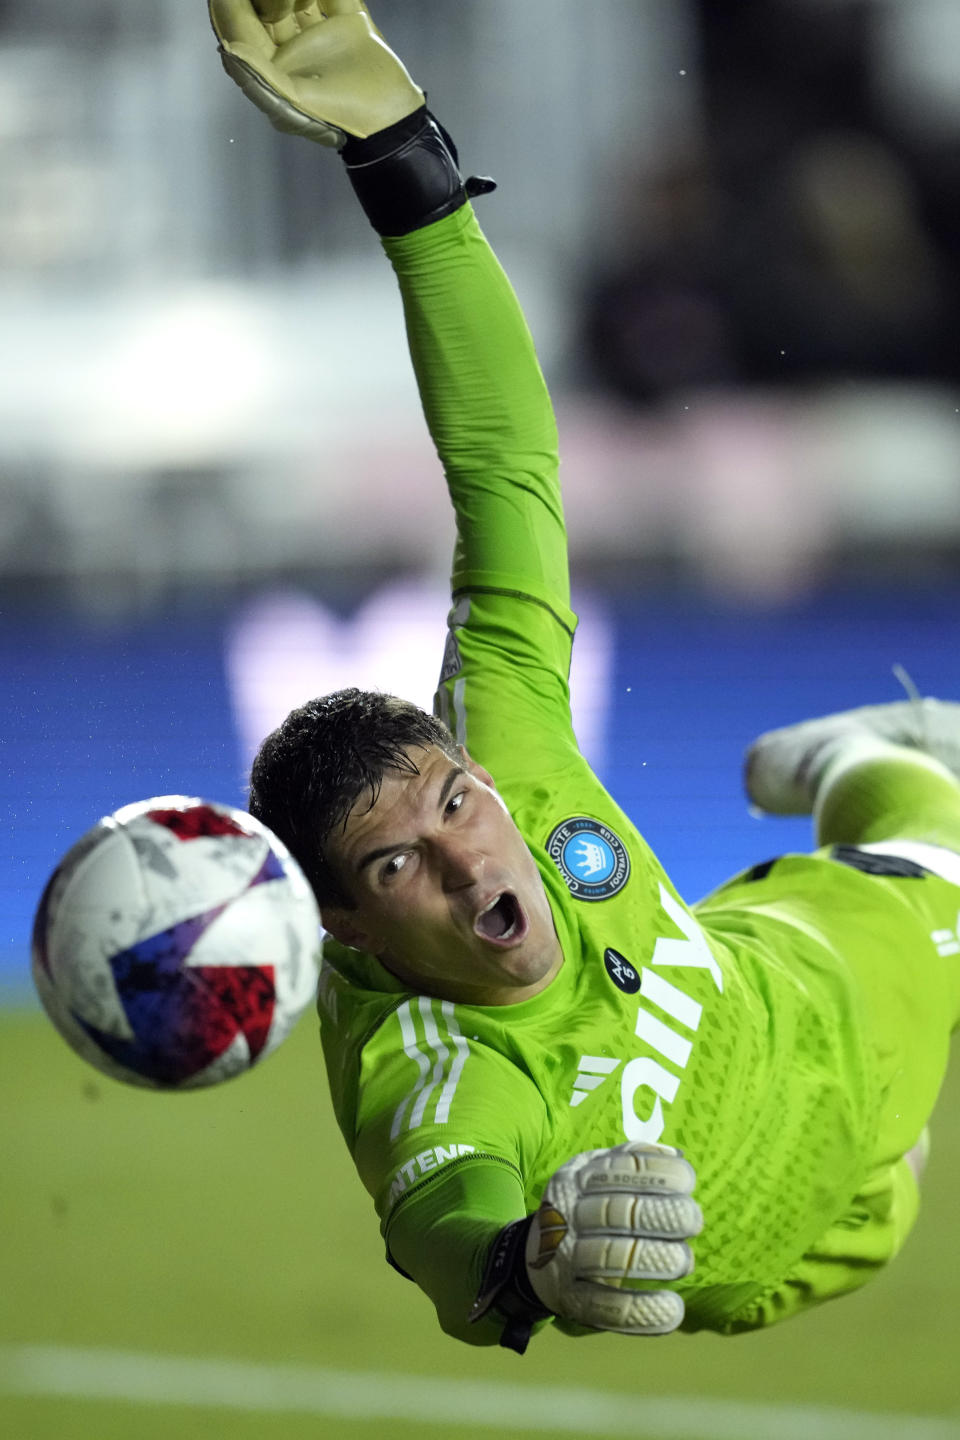 Charlotte FC goalkeeper Kristijan Kahlina deflects a shot by Inter Miami forward Leonardo Campana during the second half of an MLS soccer match, Wednesday, Oct. 18, 2023, in Fort Lauderdale, Fla. (AP Photo/Rebecca Blackwell)